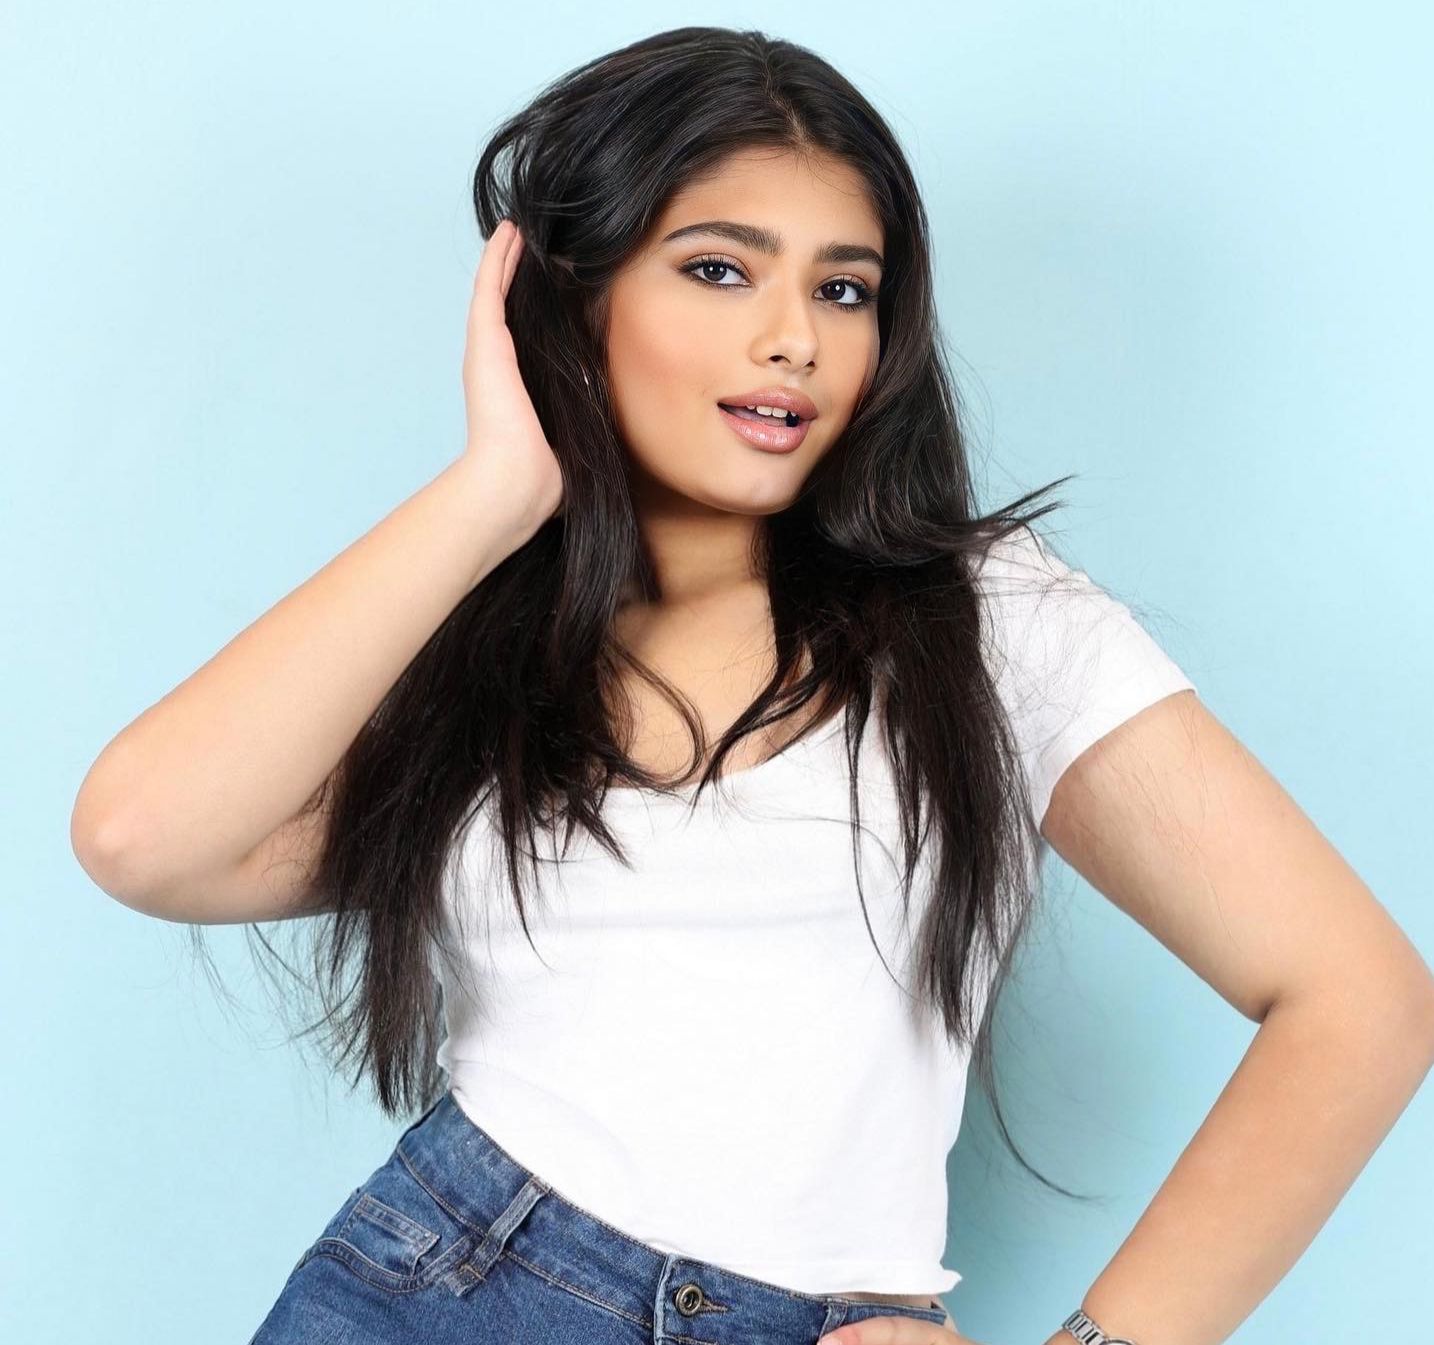 Journey to the crown: An exclusive interview with Tanishqa Sharma, Miss Teen Diva 2023-24 finalist